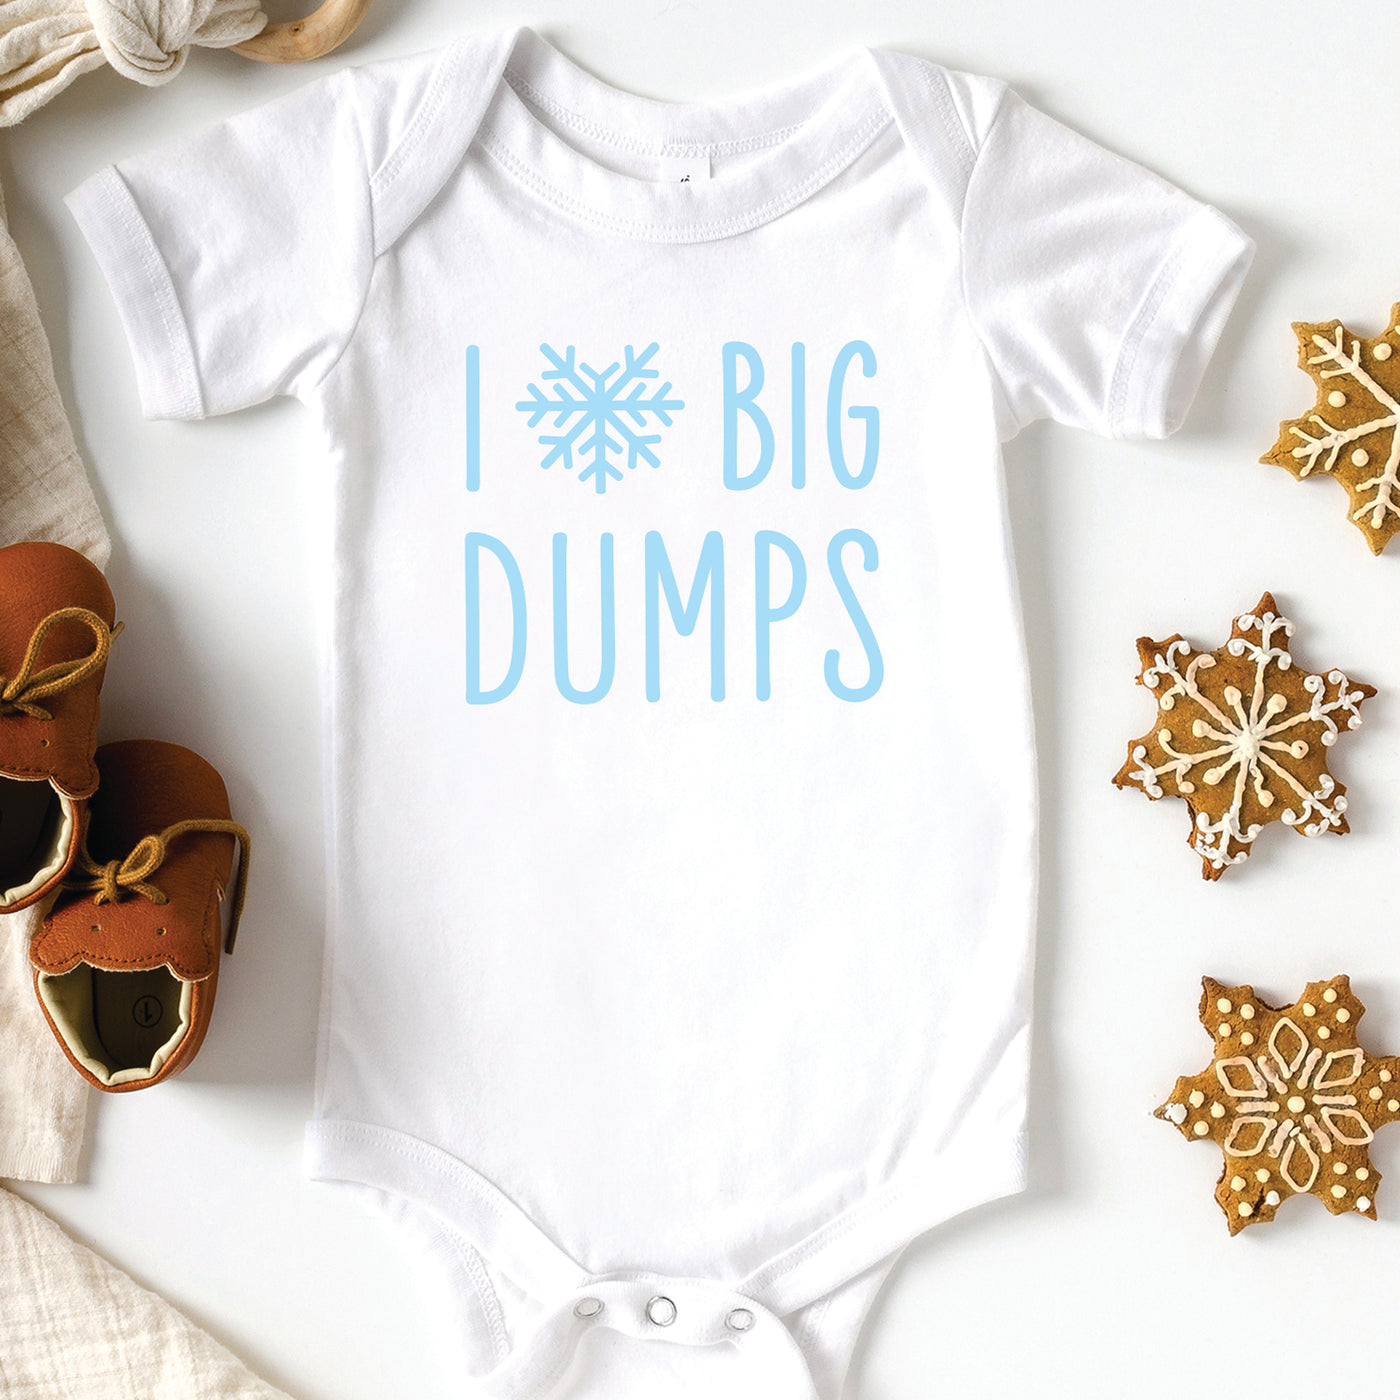 Heather dark grey short sleeve baby onesie with light blue i love big dumps heart shaped snowflake print, laying flat on white background with winter boots, a beanie hat and pine tree branch